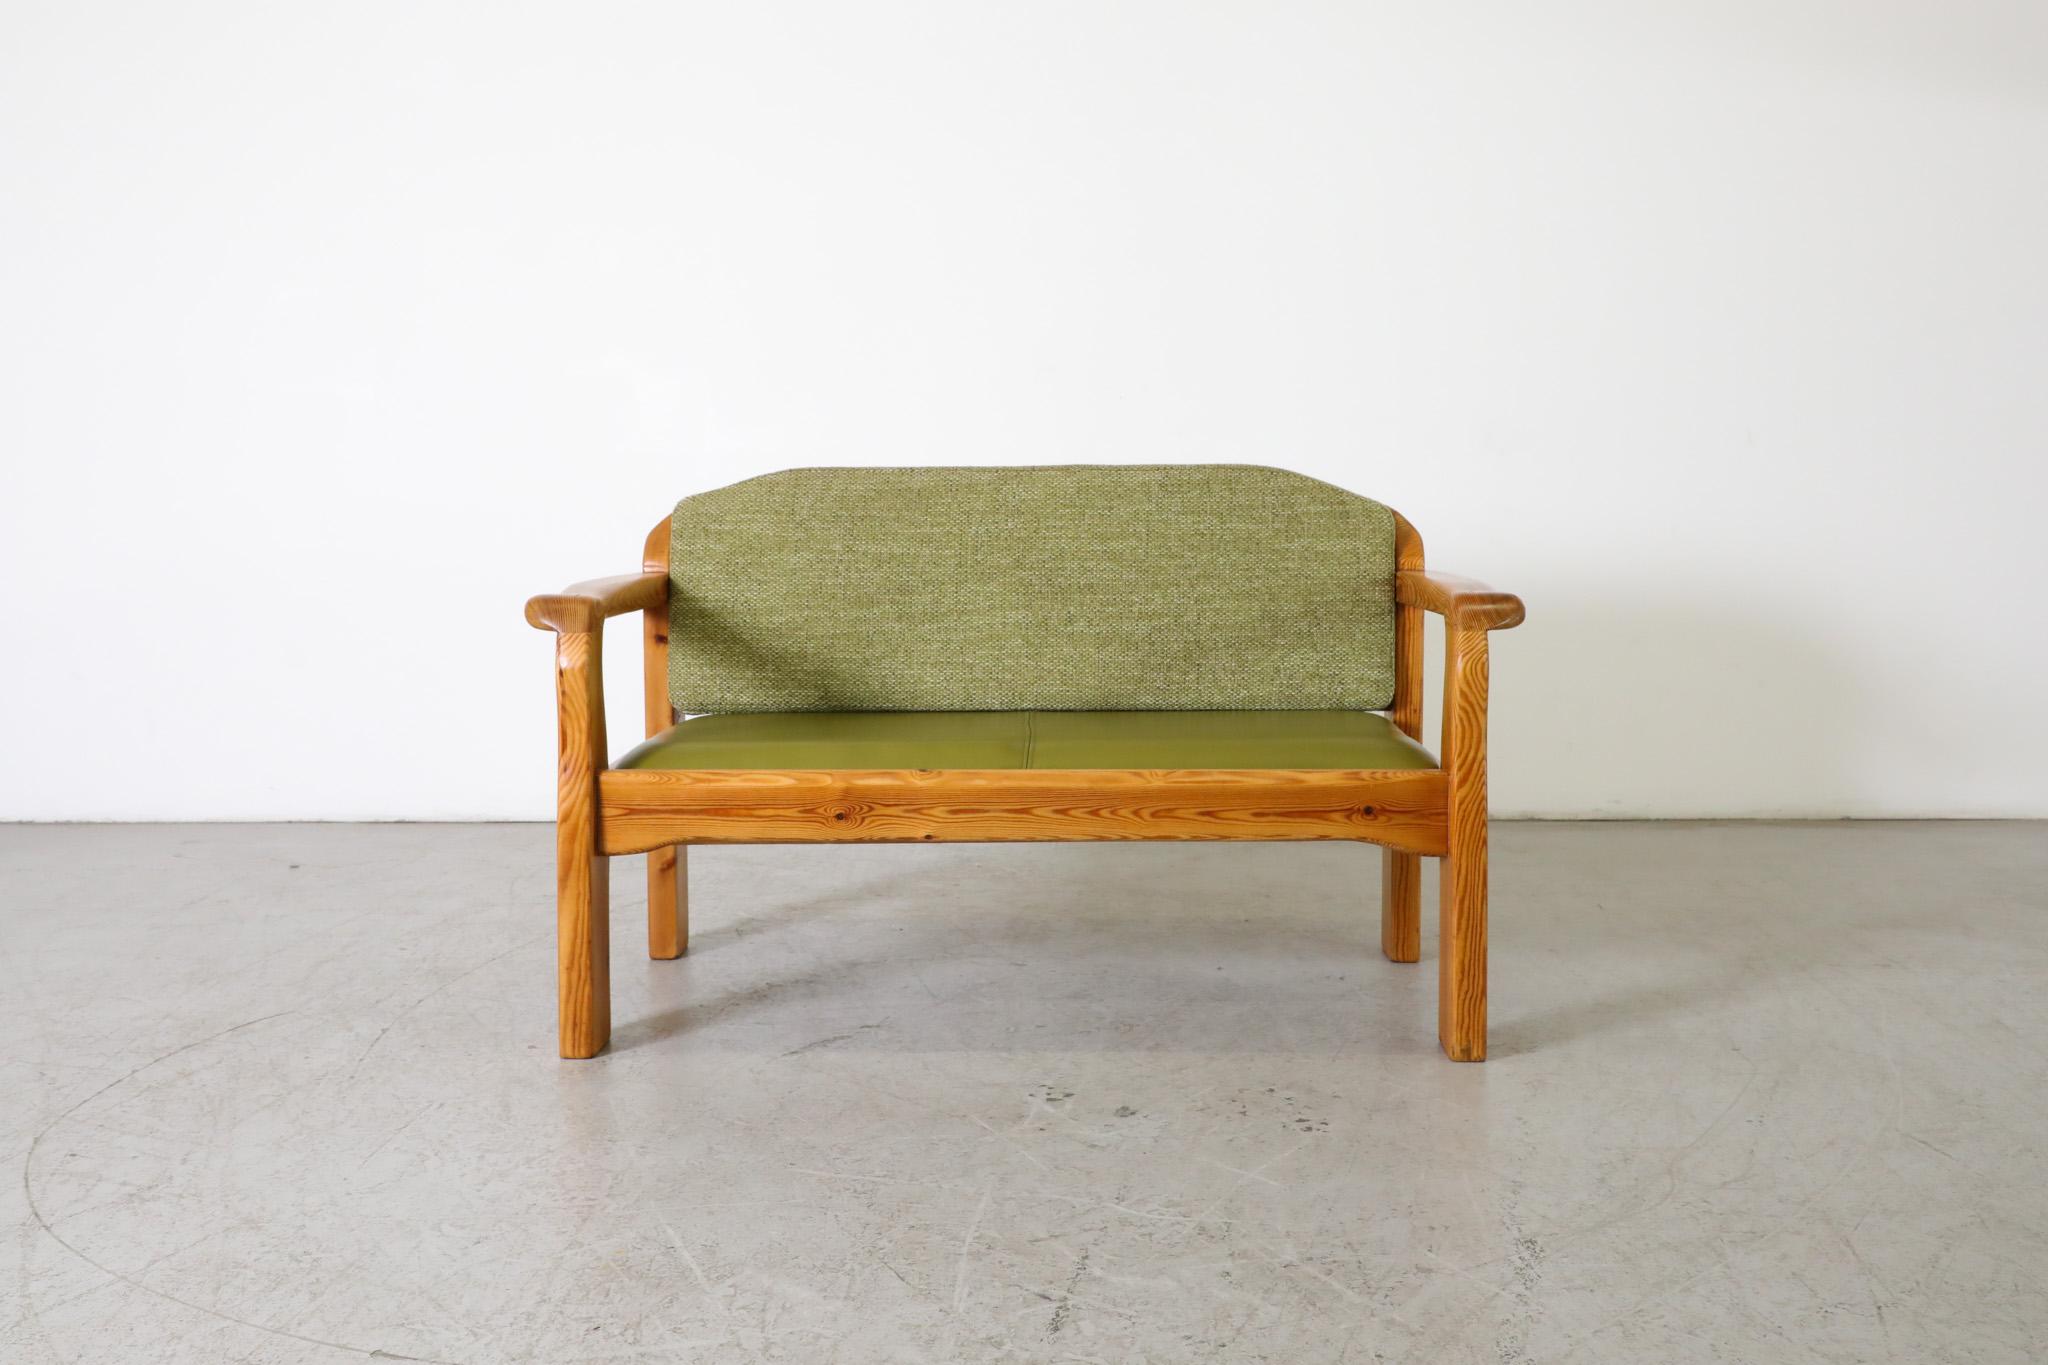 Mid-Century Ate van Apeldoorn style pine two seater bench with green skai seat and newly upholstered green fabric back cushion. Beautiful carved wood frame with attractive grain and round legs. In original condition with visible wear consistent with